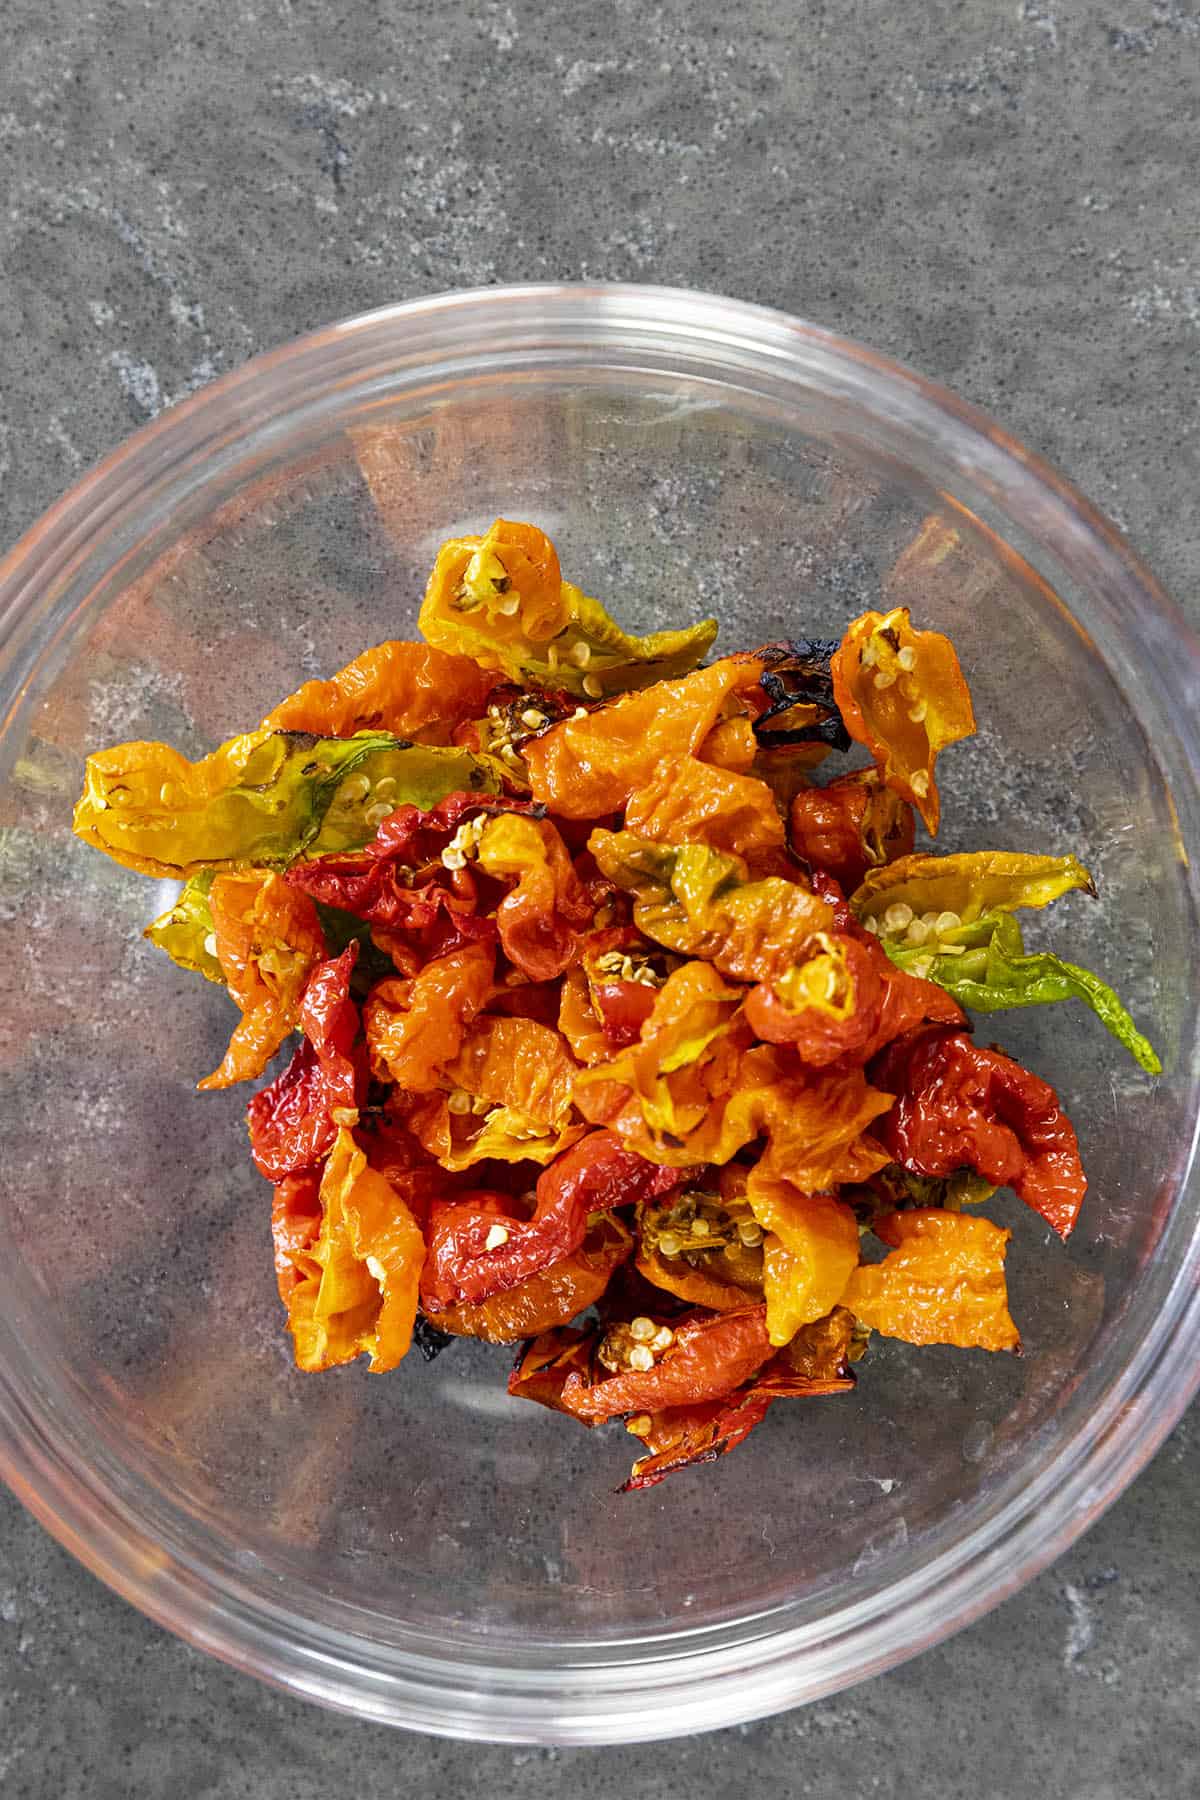 Roasted Superhot Hot chili peppers in a bowl